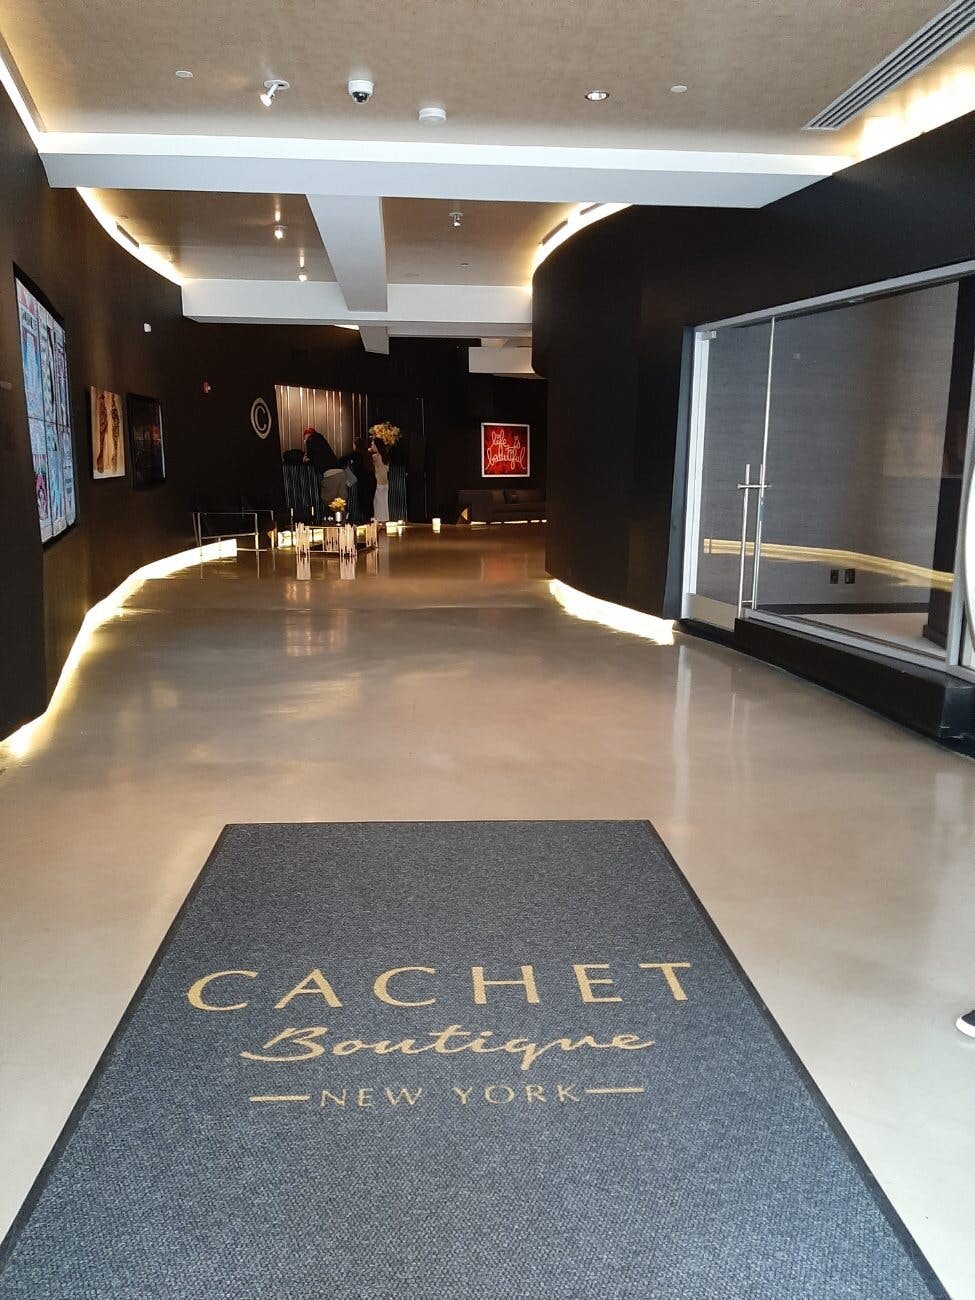 Cachet Boutique Hotel, located in Manhattan, NY